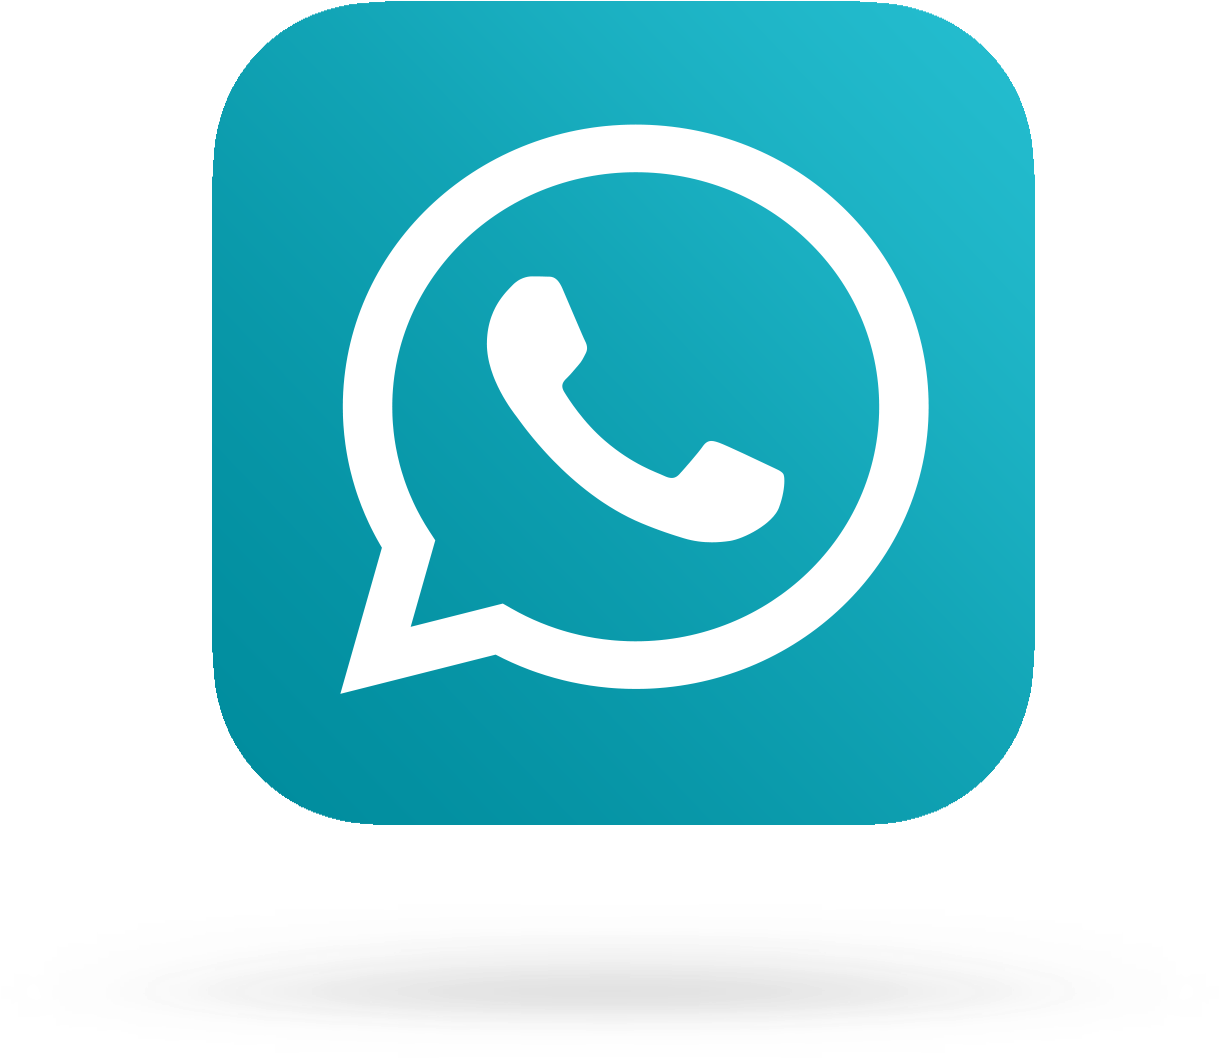 Whats Up Symbols Png Download Whats App Install